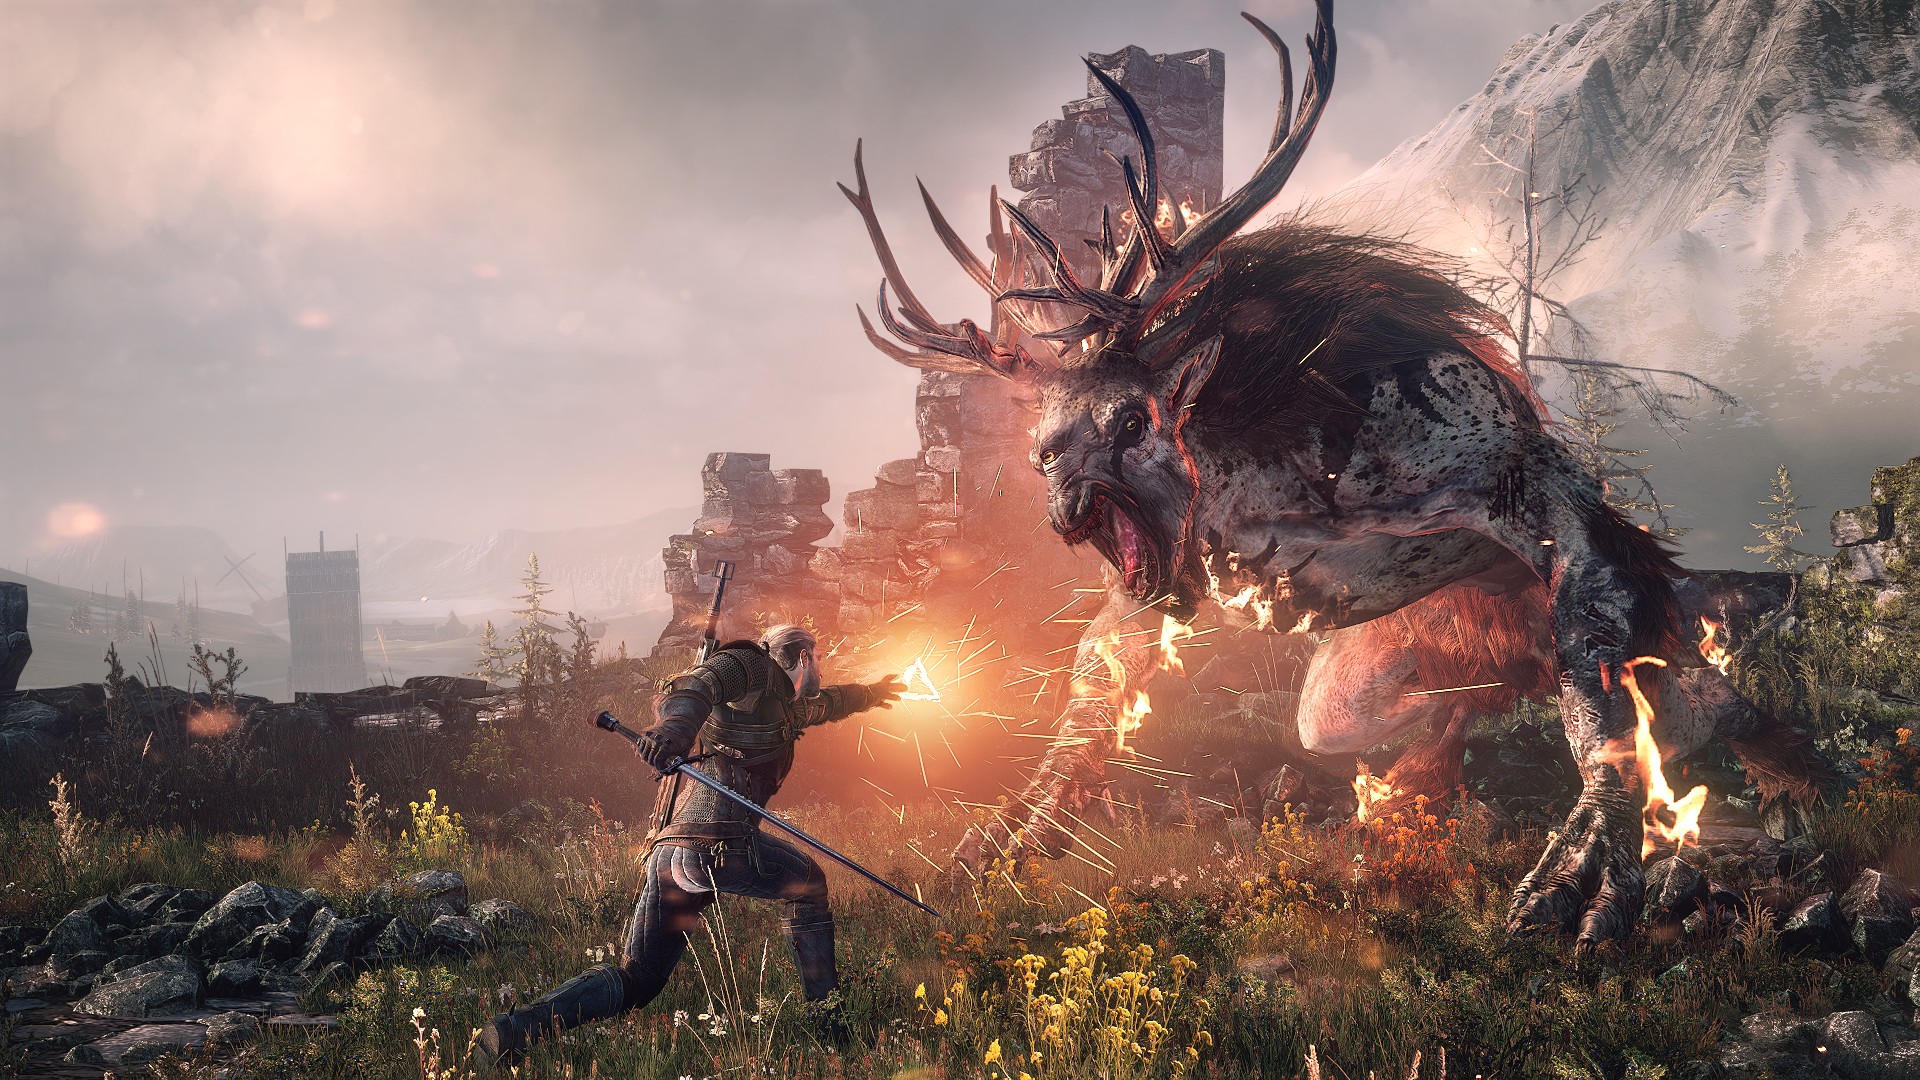 Media asset in full size related to 3dfxzone.it news item entitled as follows: Nuovi screenshot in Full HD del game RPG The Witcher 3: Wild Hunt | Image Name: news19716_The-Witcher-3-Wild-Hunt_1.jpg